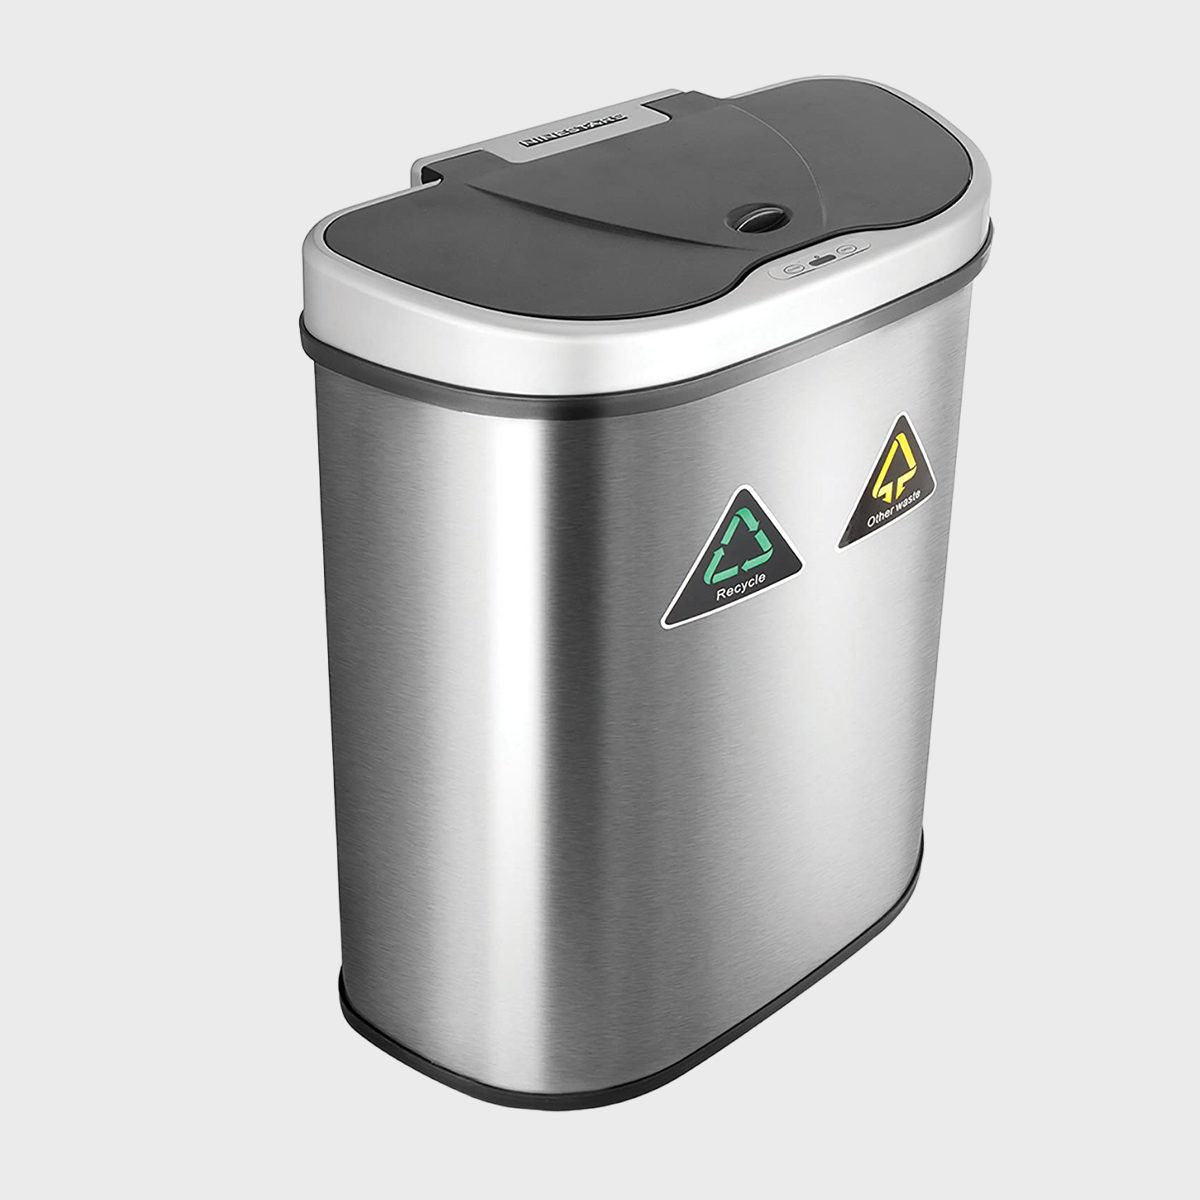 8 Touchless Trash Can Models For Hands-Free Cleaning